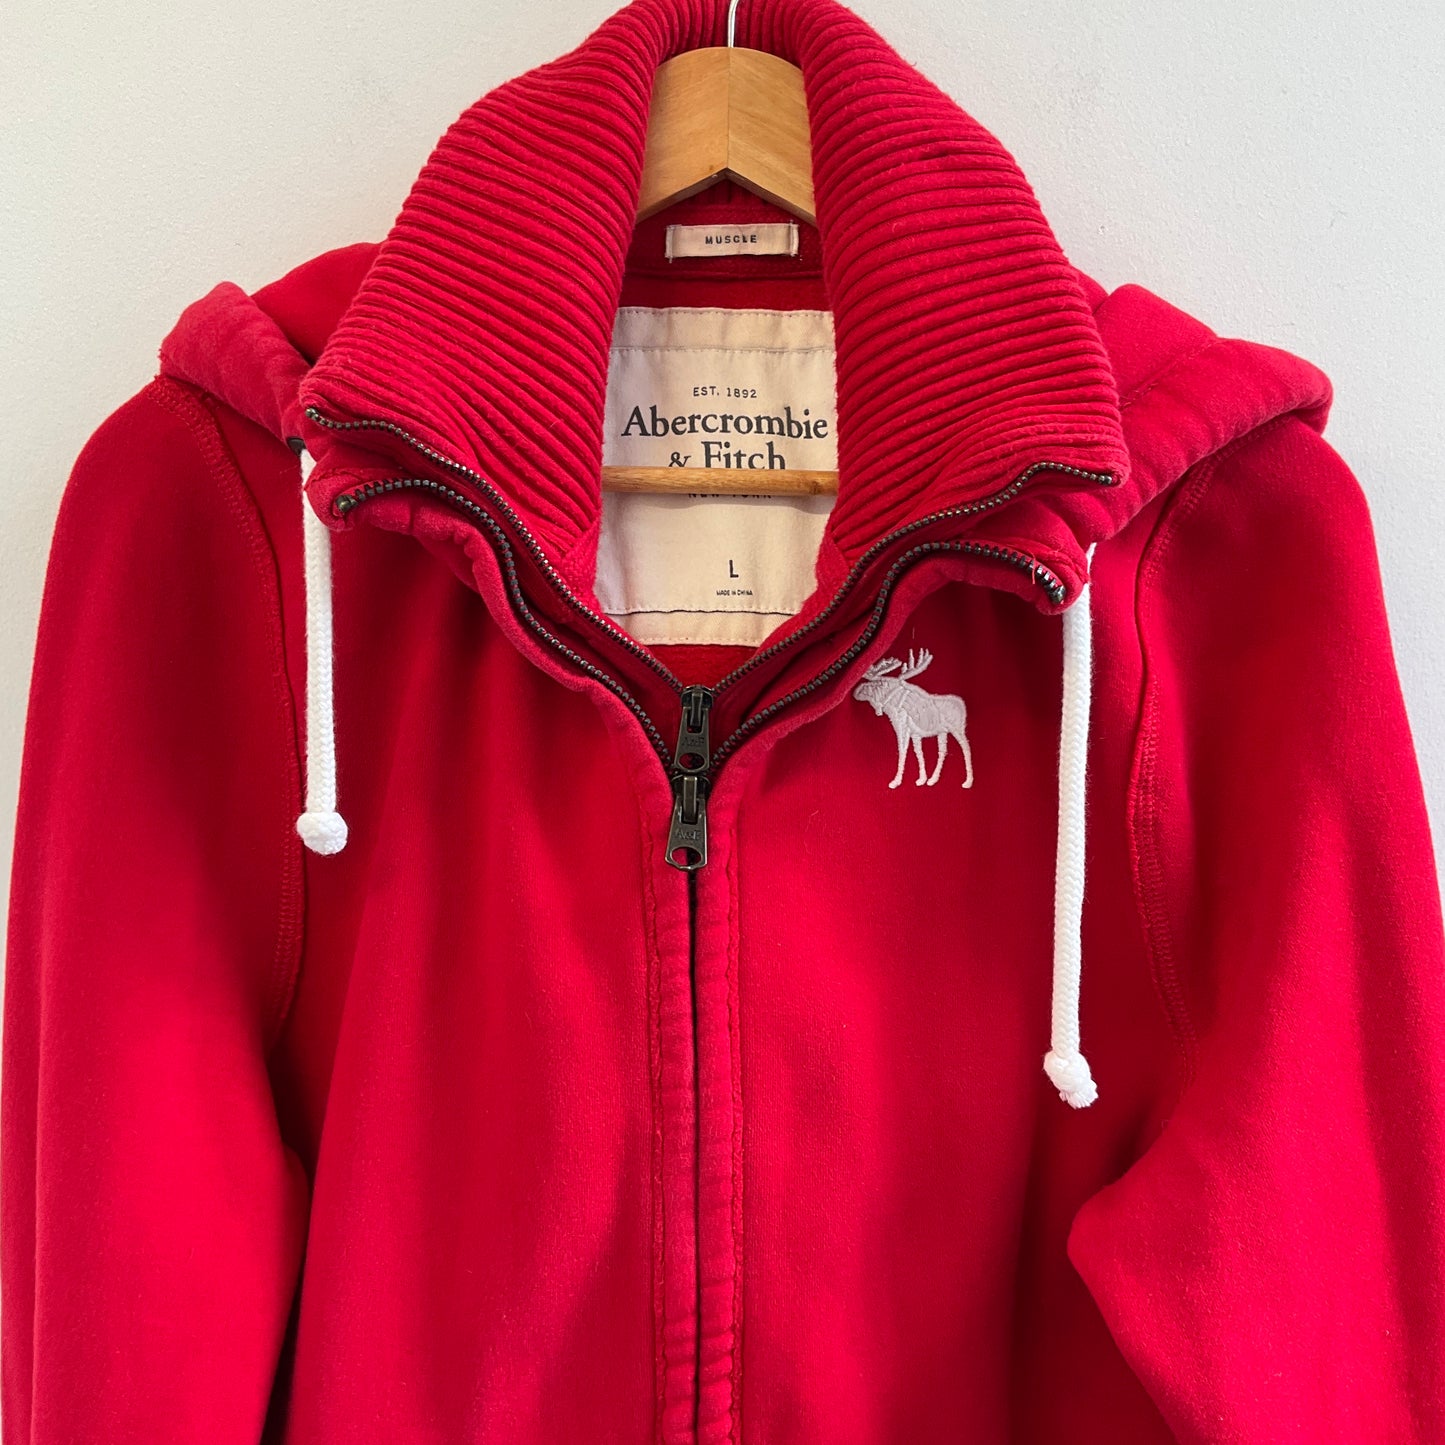 Abercrombie & Fitch - Hoodie Jacket